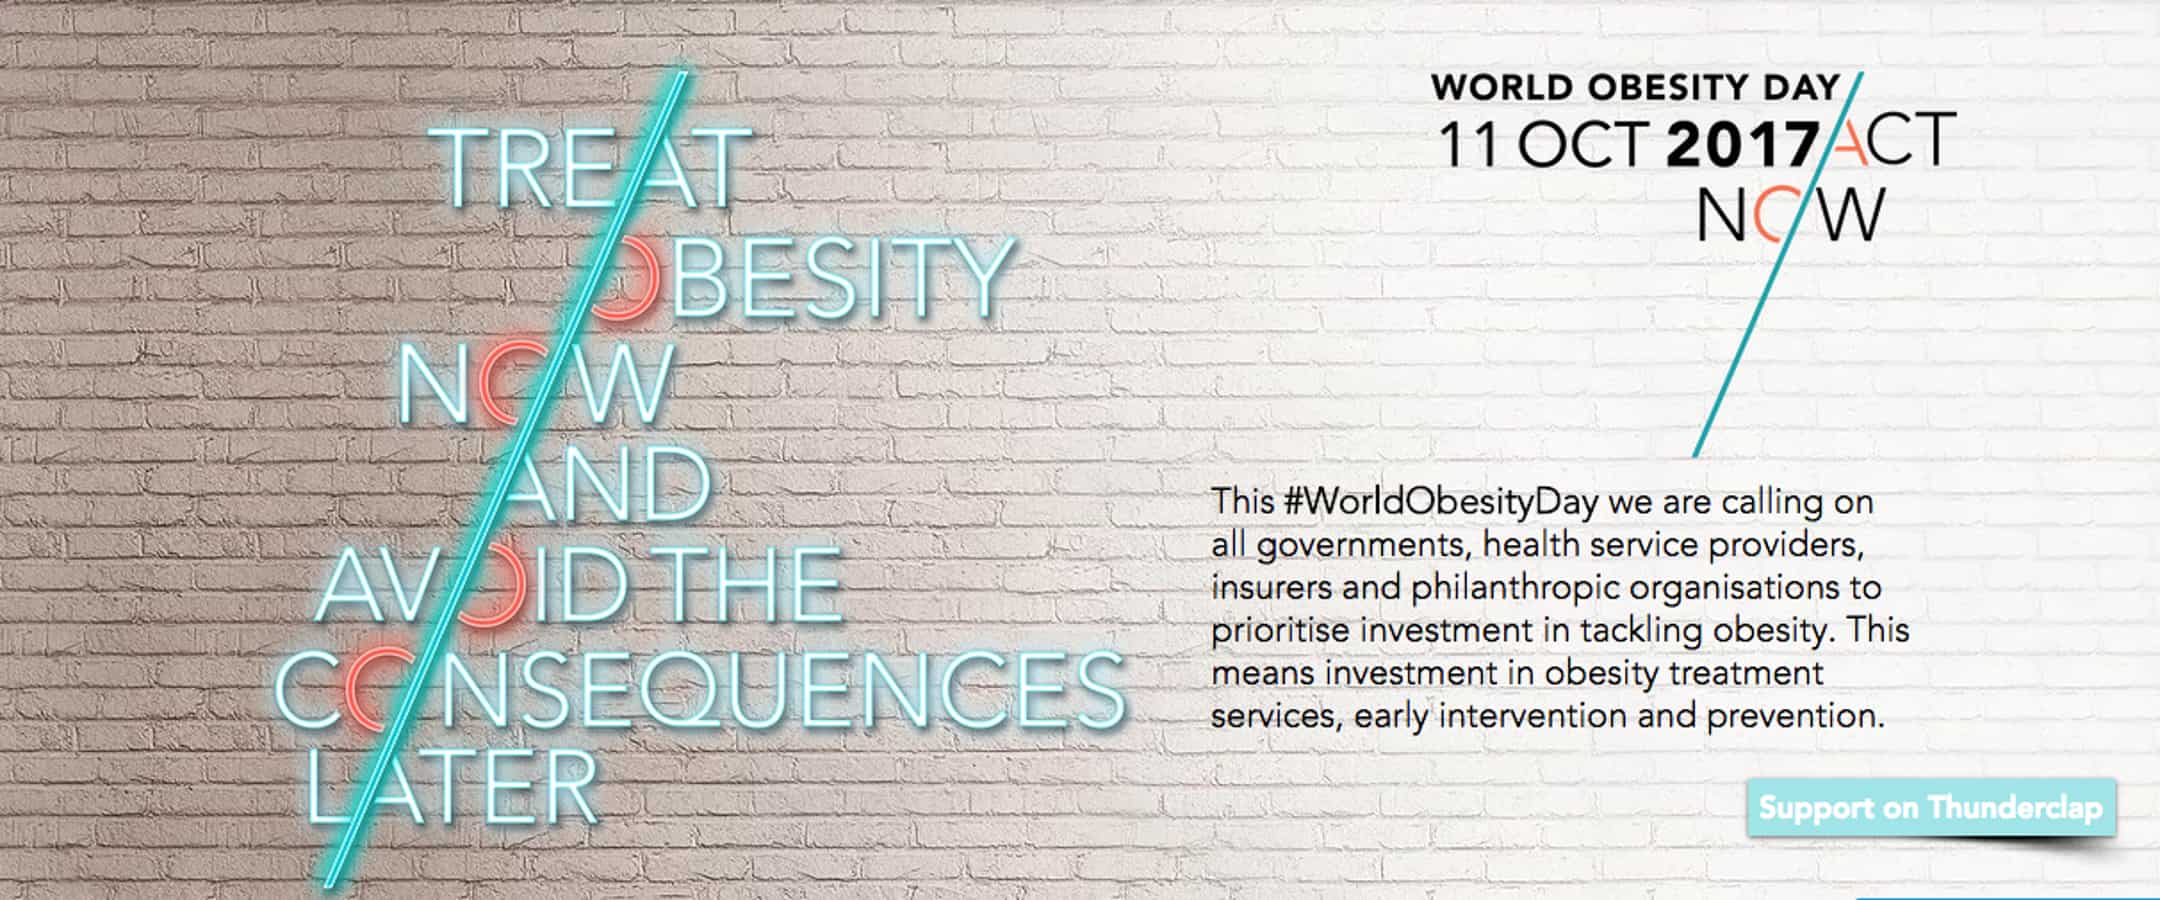 The annual cost of treating the health impacts of obesity is projected to top US$1.2 trillion globally by 2025, according to new estimates on World Obesity Day.